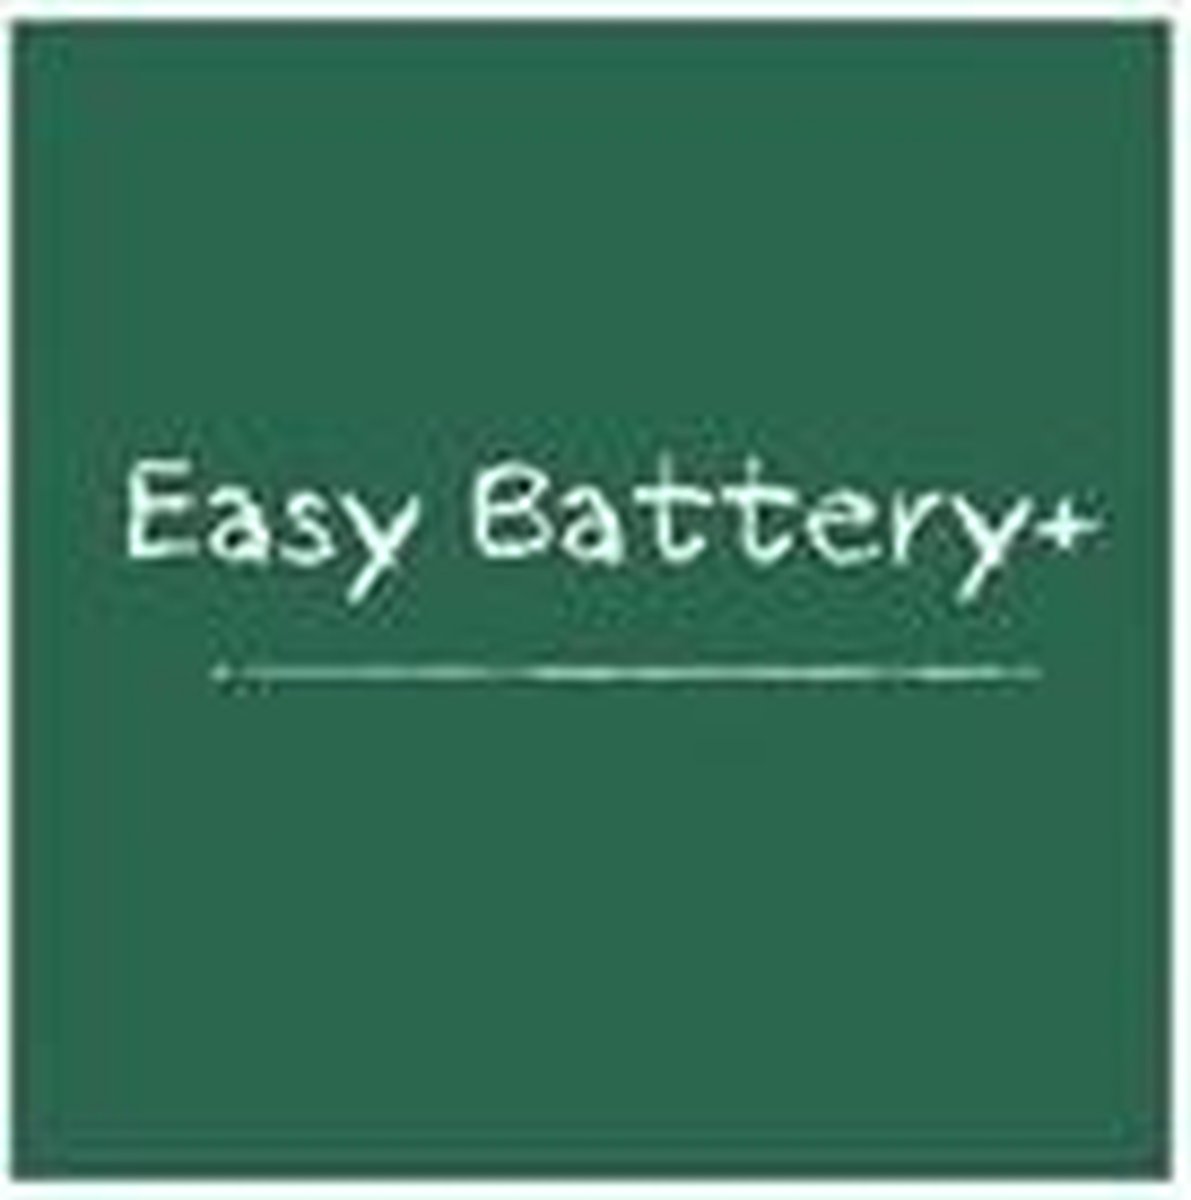 Easy Battery+ WEB VOUCHER product AA